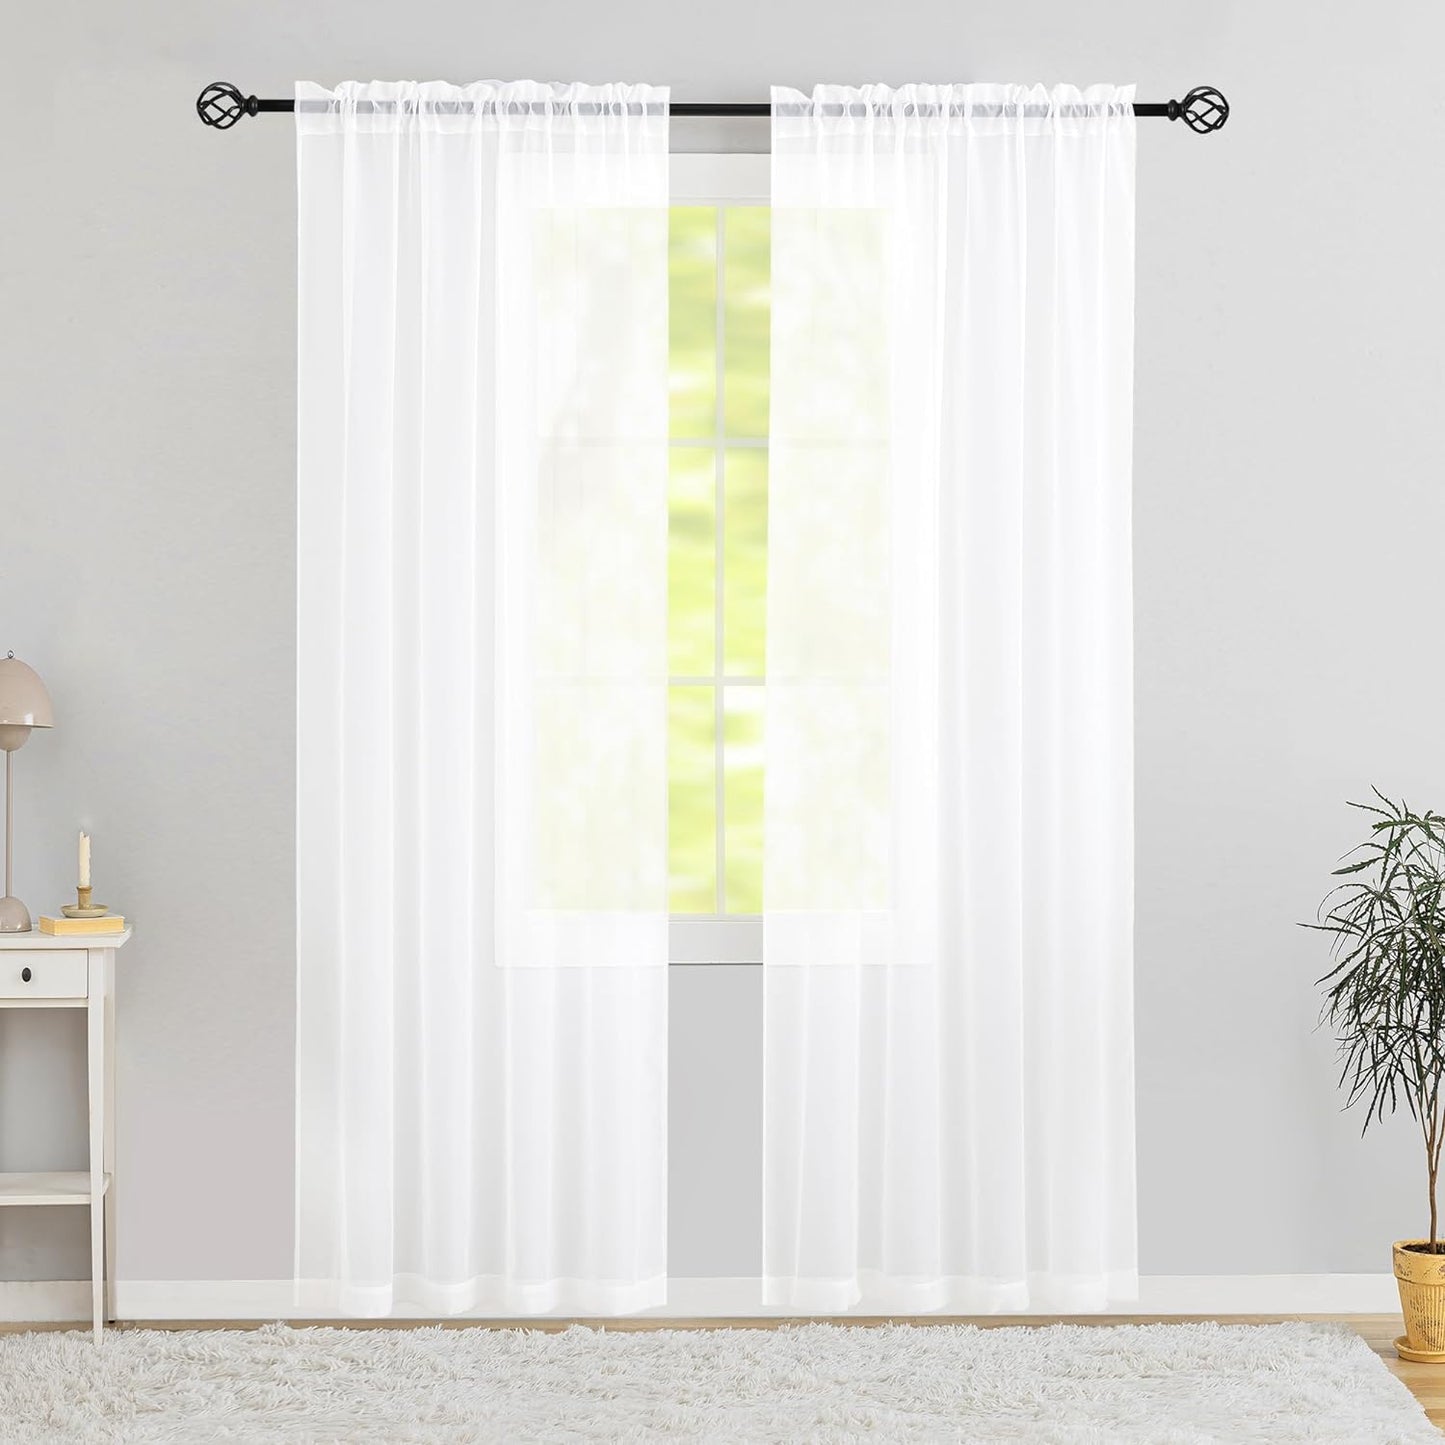 Semi Voile White Sheer Curtains 84 Inches Long 2 Panels Rod Pocket Window Treatment for Living Room Bedroom Dining Room(White 52" W X 84" L)  Karseteli White 42"W X 63"L 